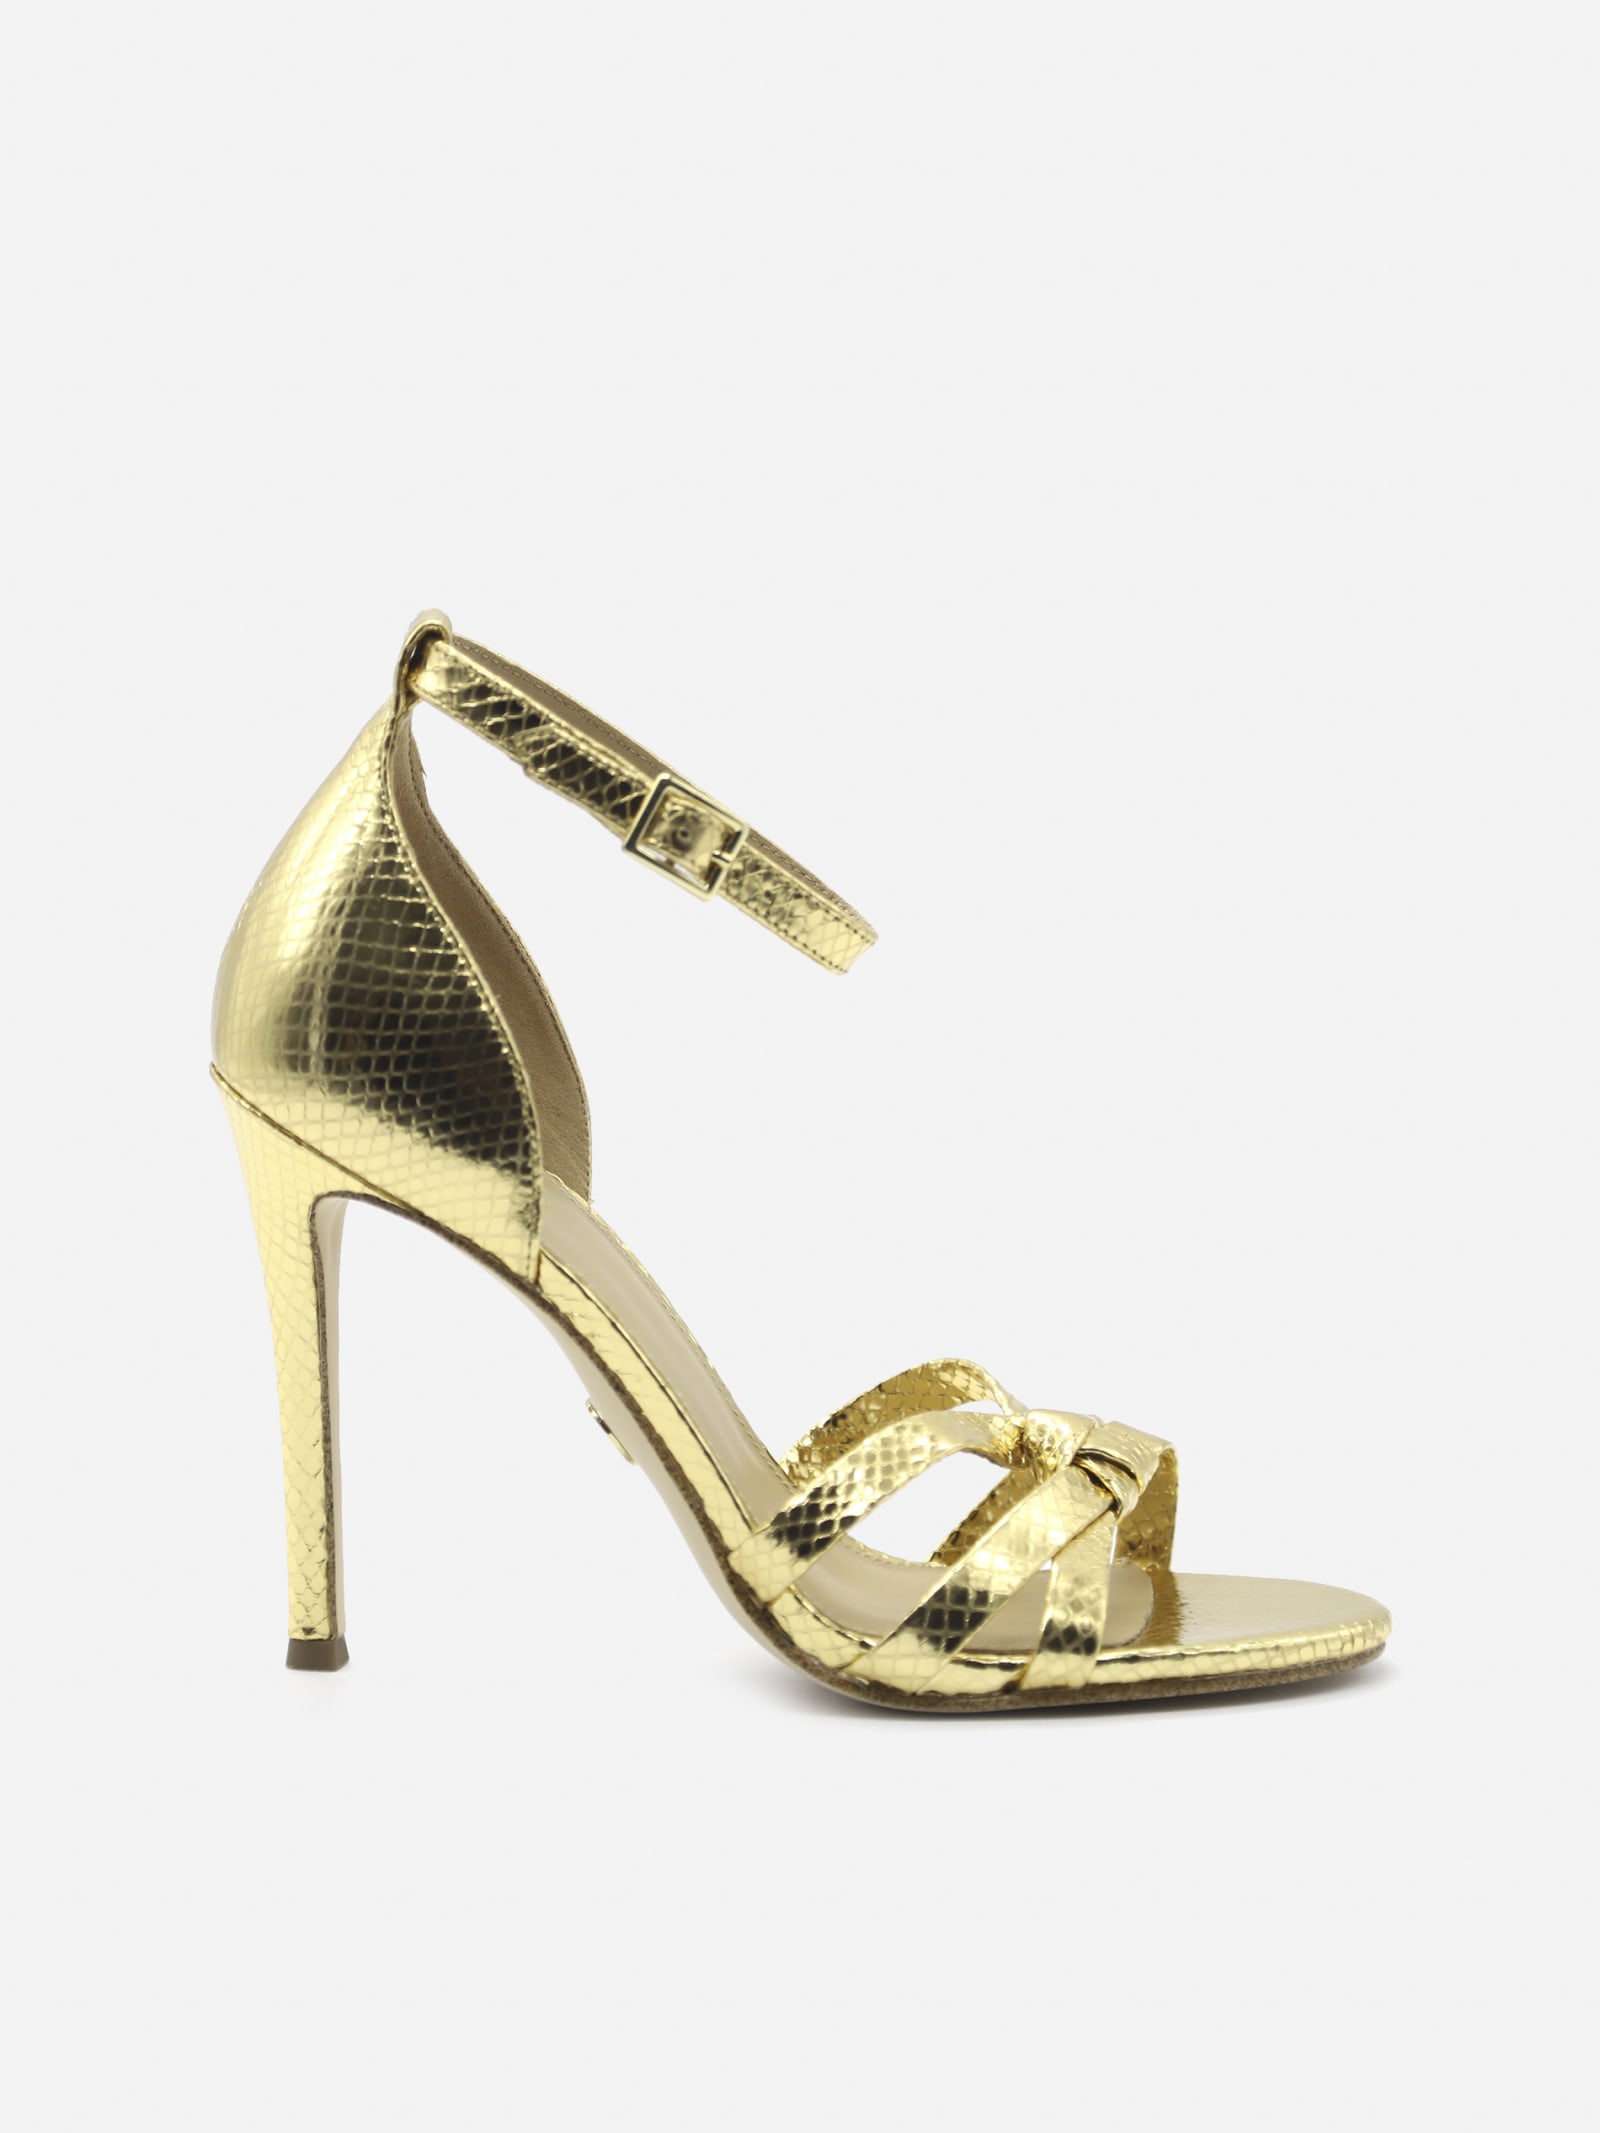 Buy MICHAEL Michael Kors Brinkley Sandals In Metallic Leather online, shop MICHAEL Michael Kors shoes with free shipping